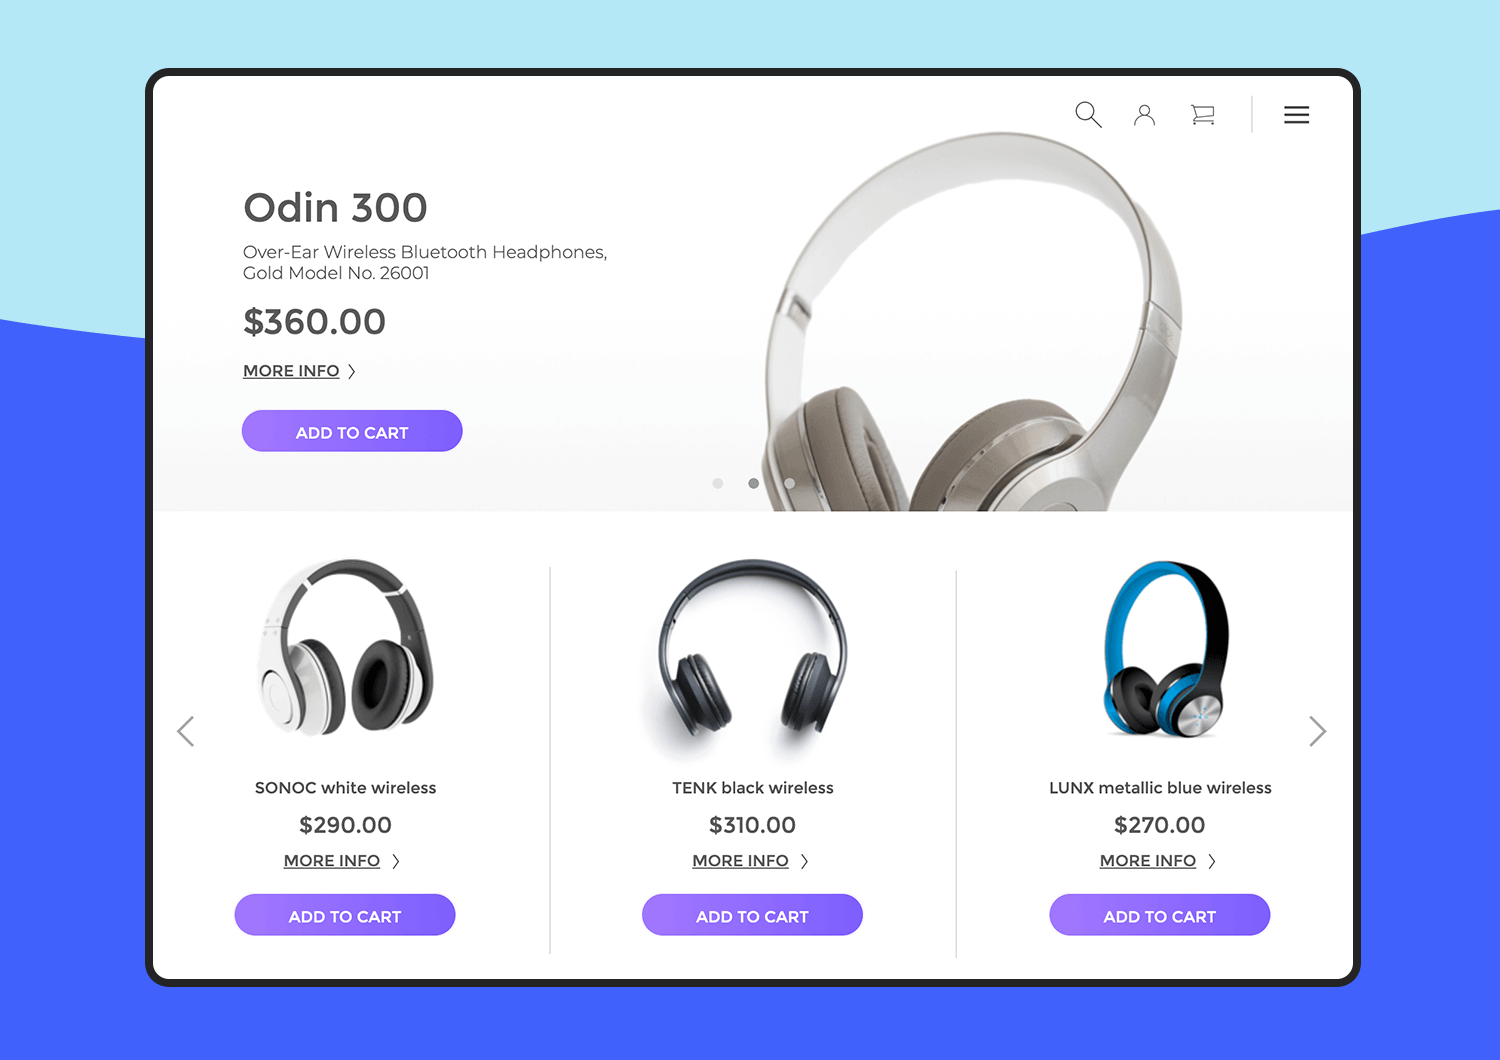 Online store app template showcasing headphones with product details and add-to-cart buttons